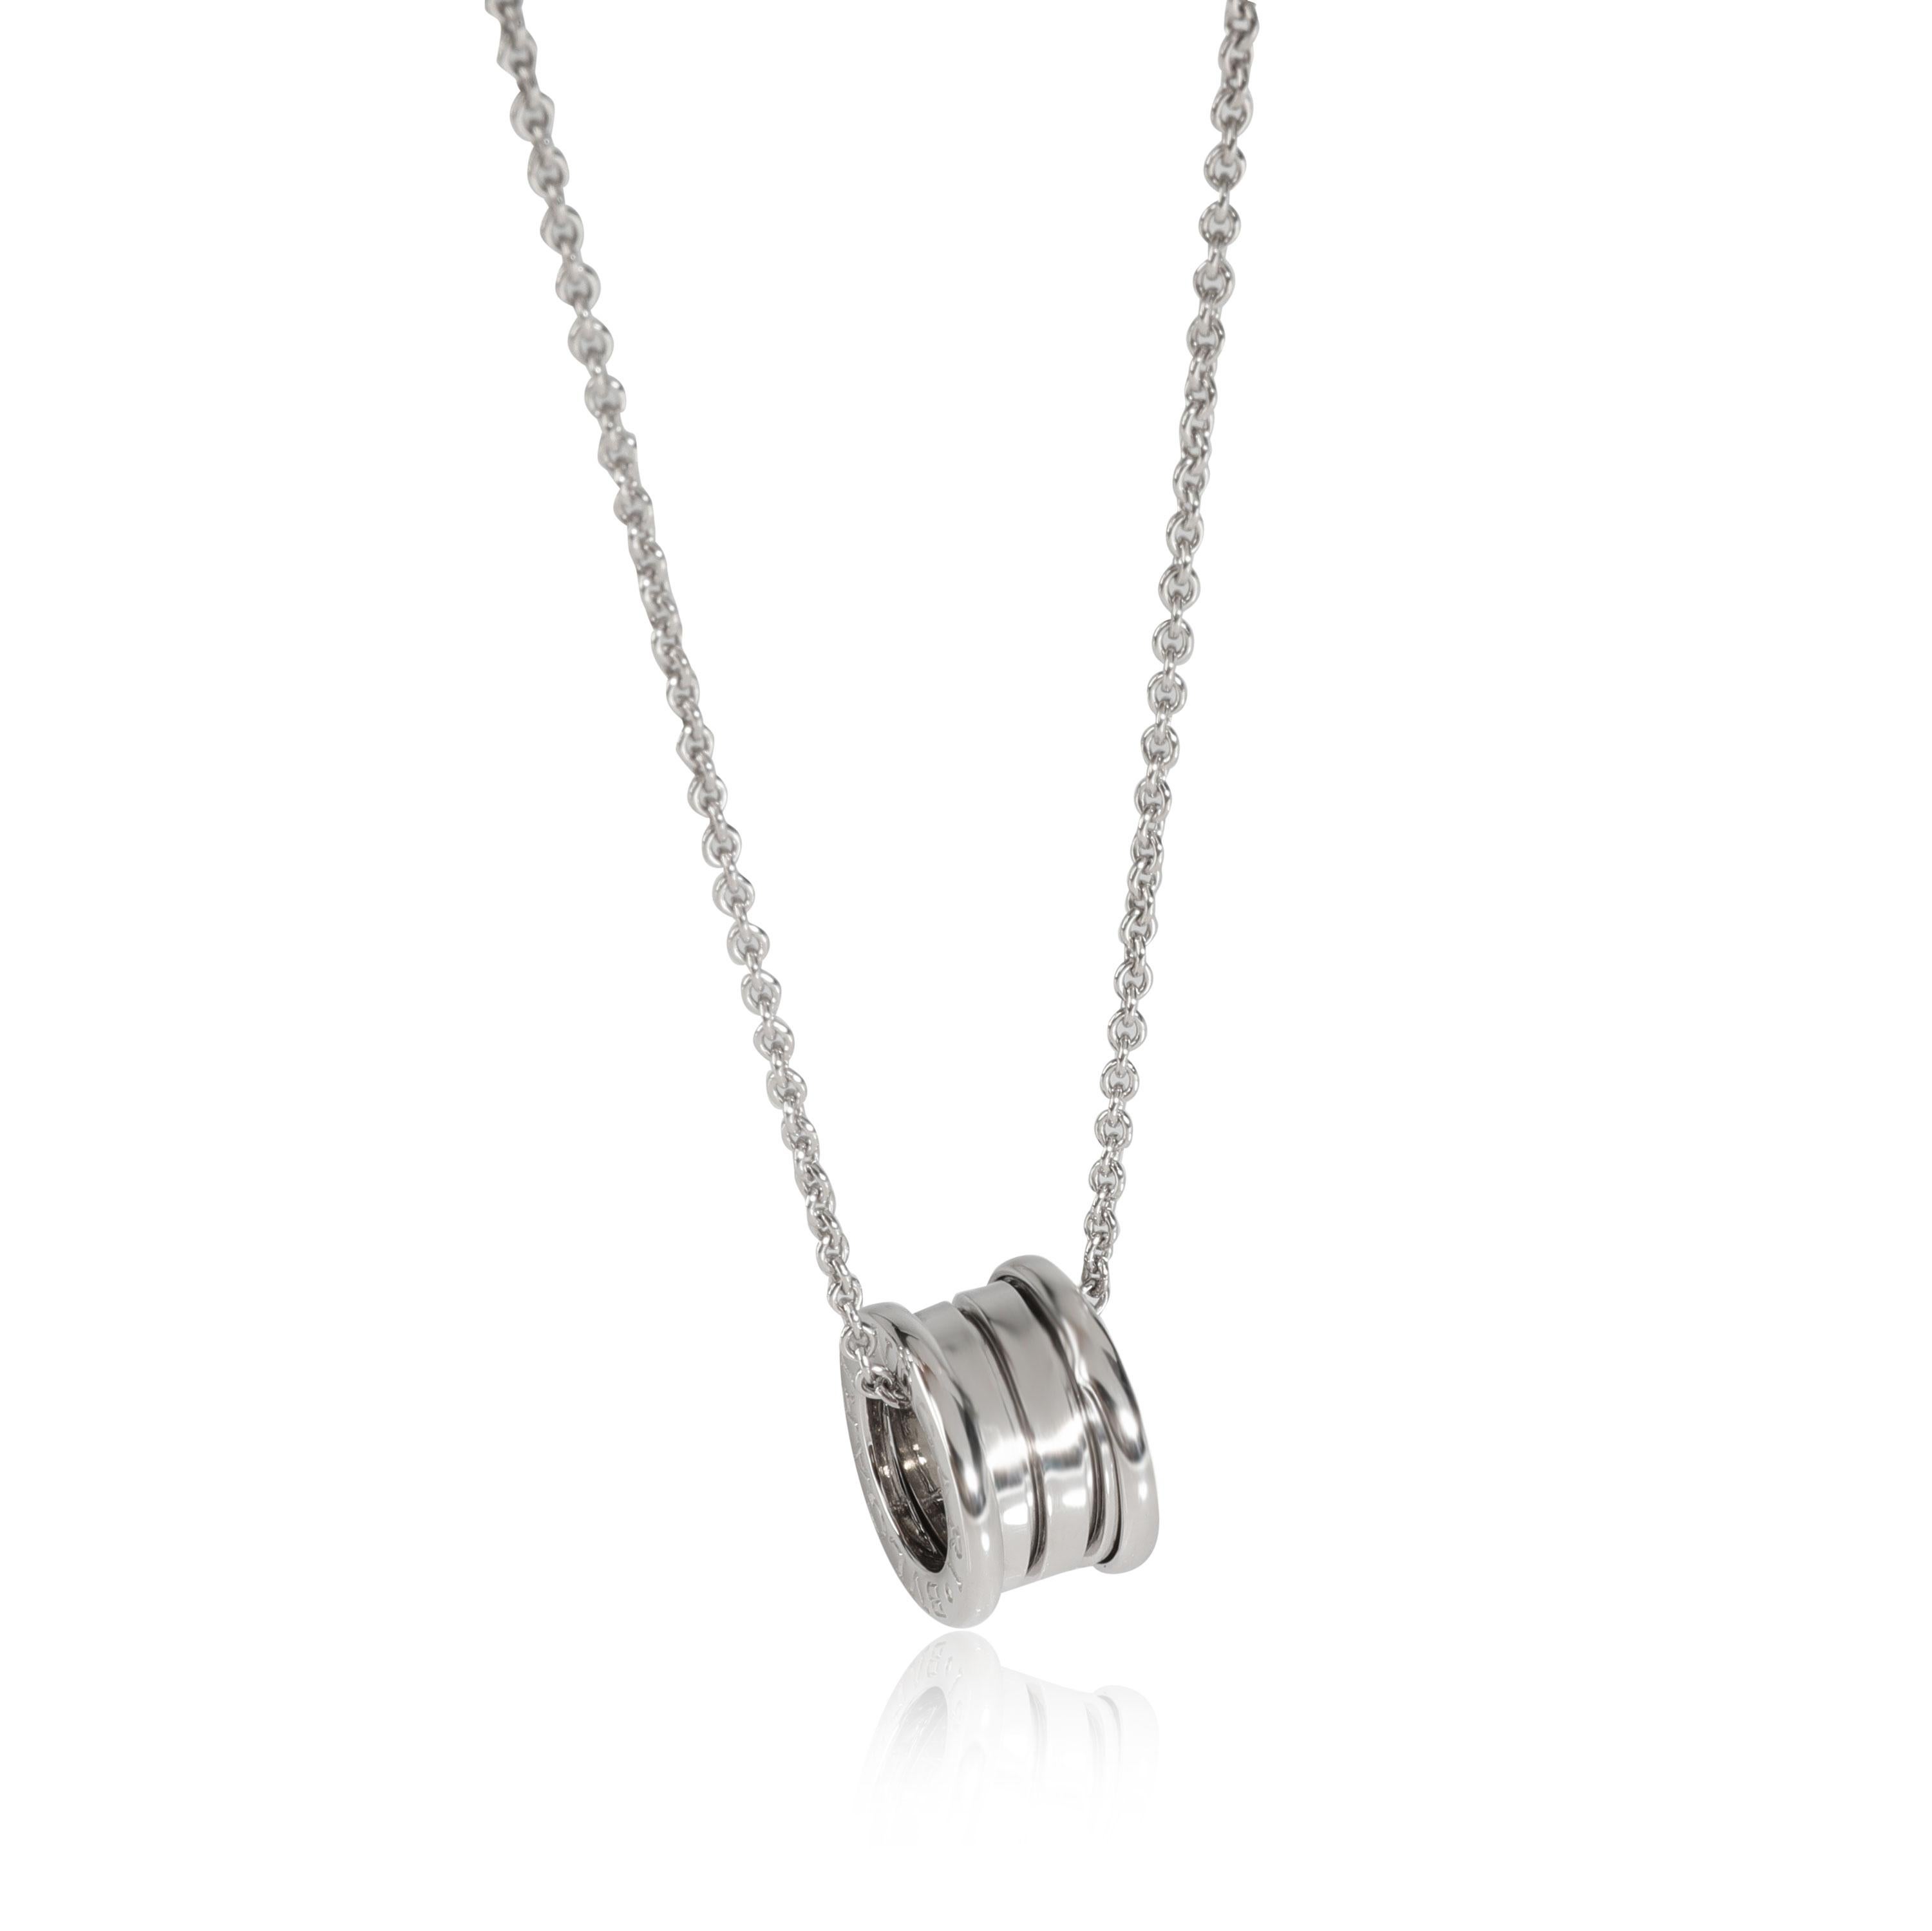 Bulgari B.Zero1 Pendant in 18kt White Gold

PRIMARY DETAILS
SKU: 112746
Listing Title: Bulgari B.Zero1 Pendant in 18kt White Gold
Condition Description: Retails for 3600 USD. In excellent condition and recently polished. Chain is 16 inches in